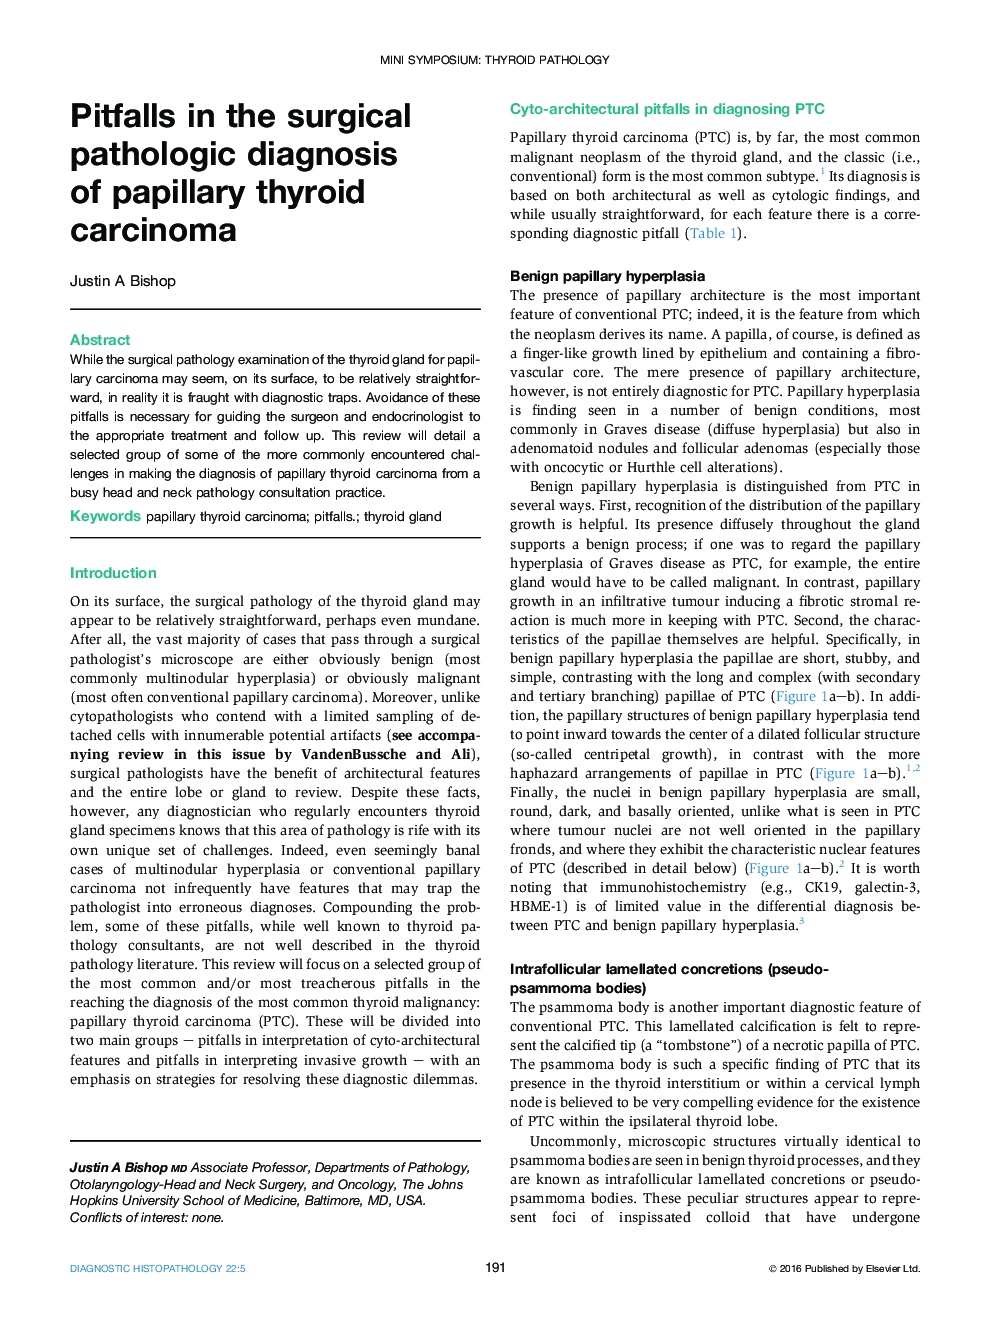 Pitfalls in the surgical pathologic diagnosis of papillary thyroid carcinoma